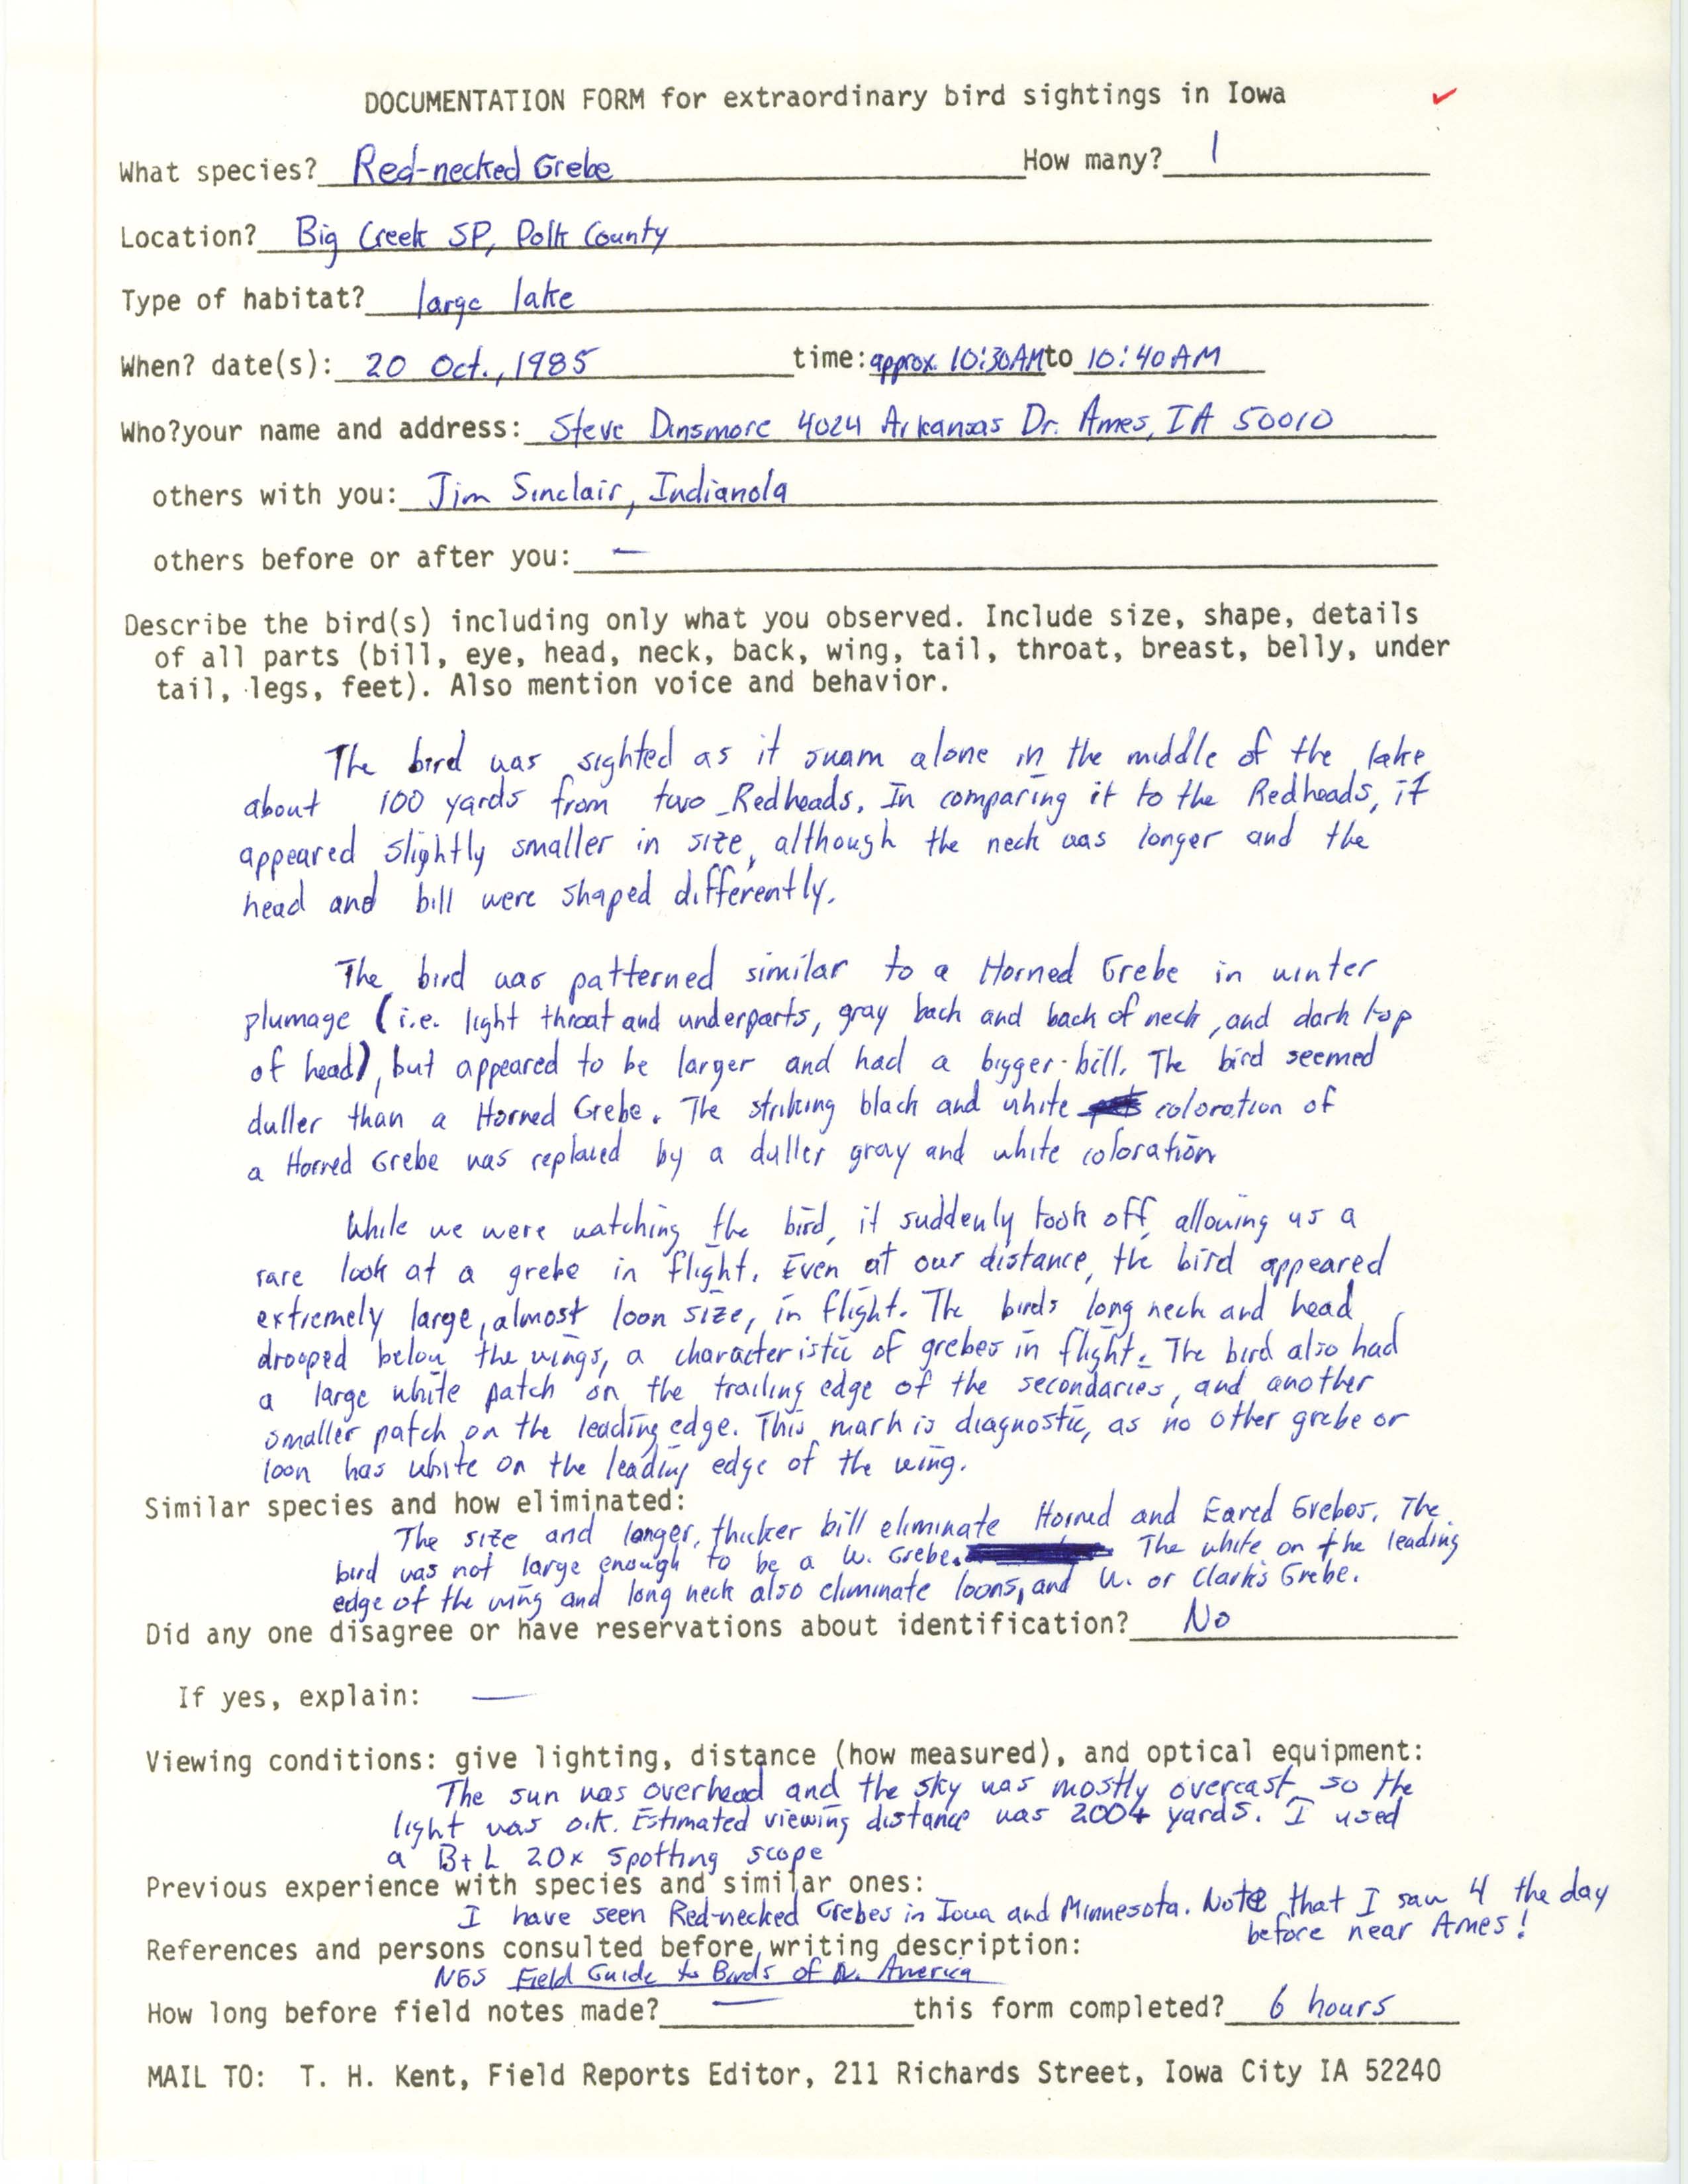 Rare bird documentation form for Red-necked Grebe at Big Creek State Park, 1985